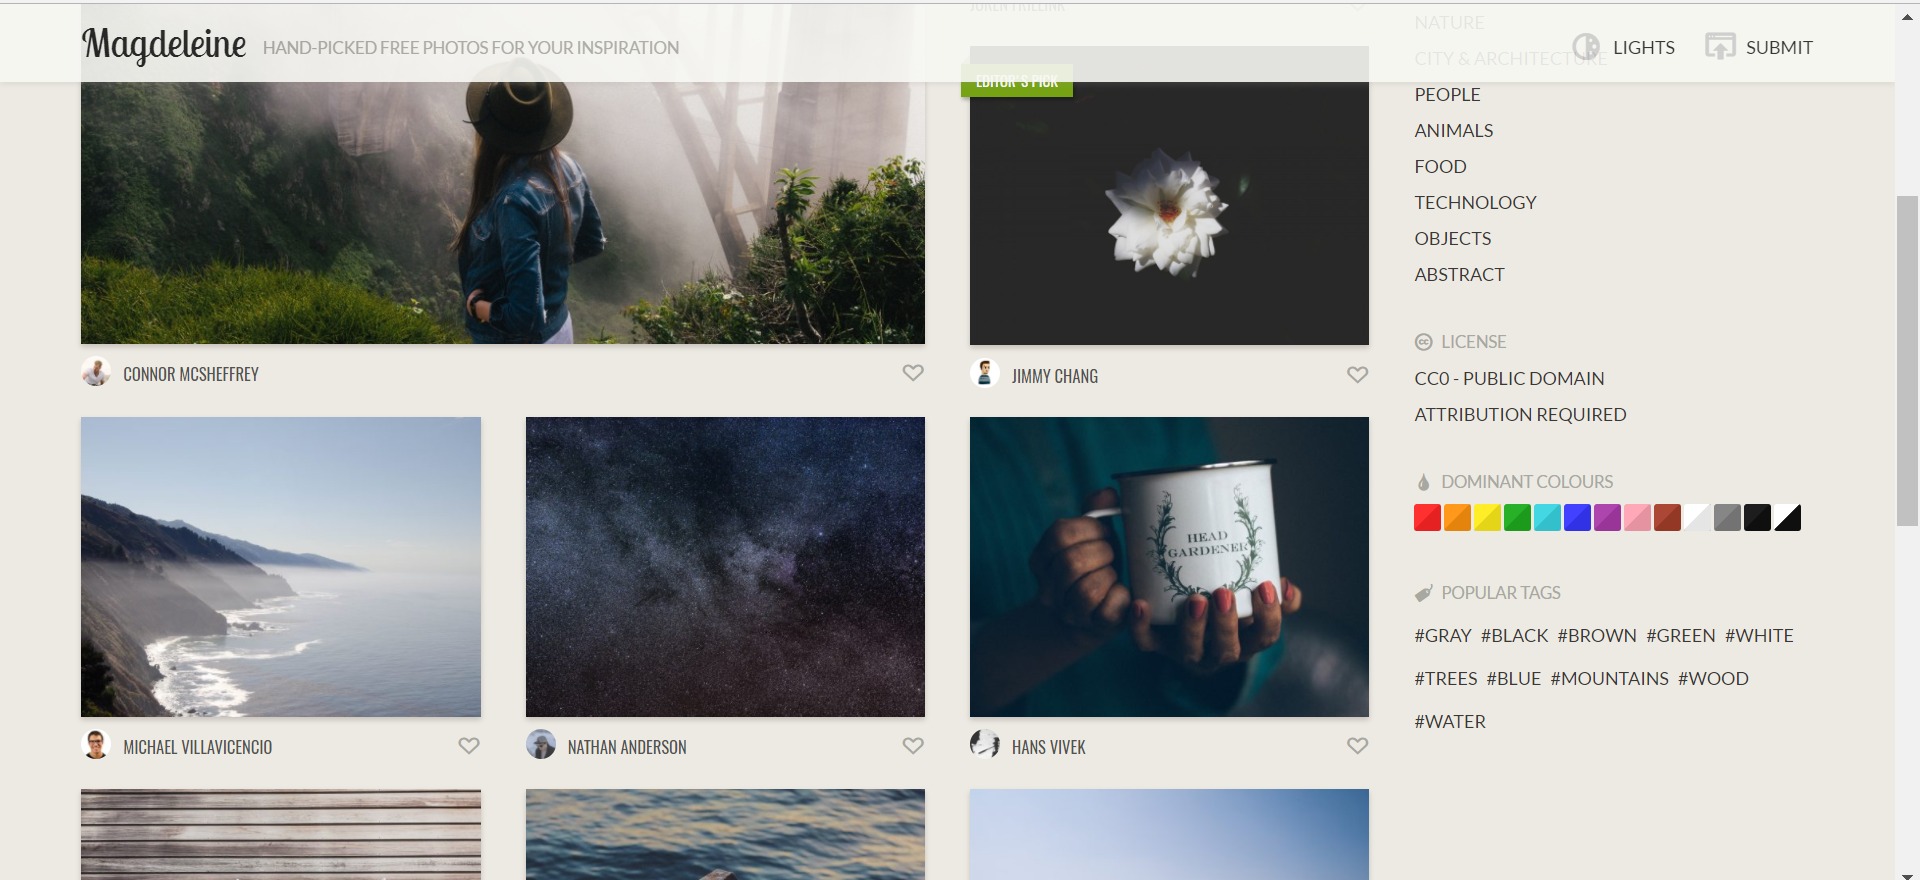 5 More Places to Find Free Images for Your Blog